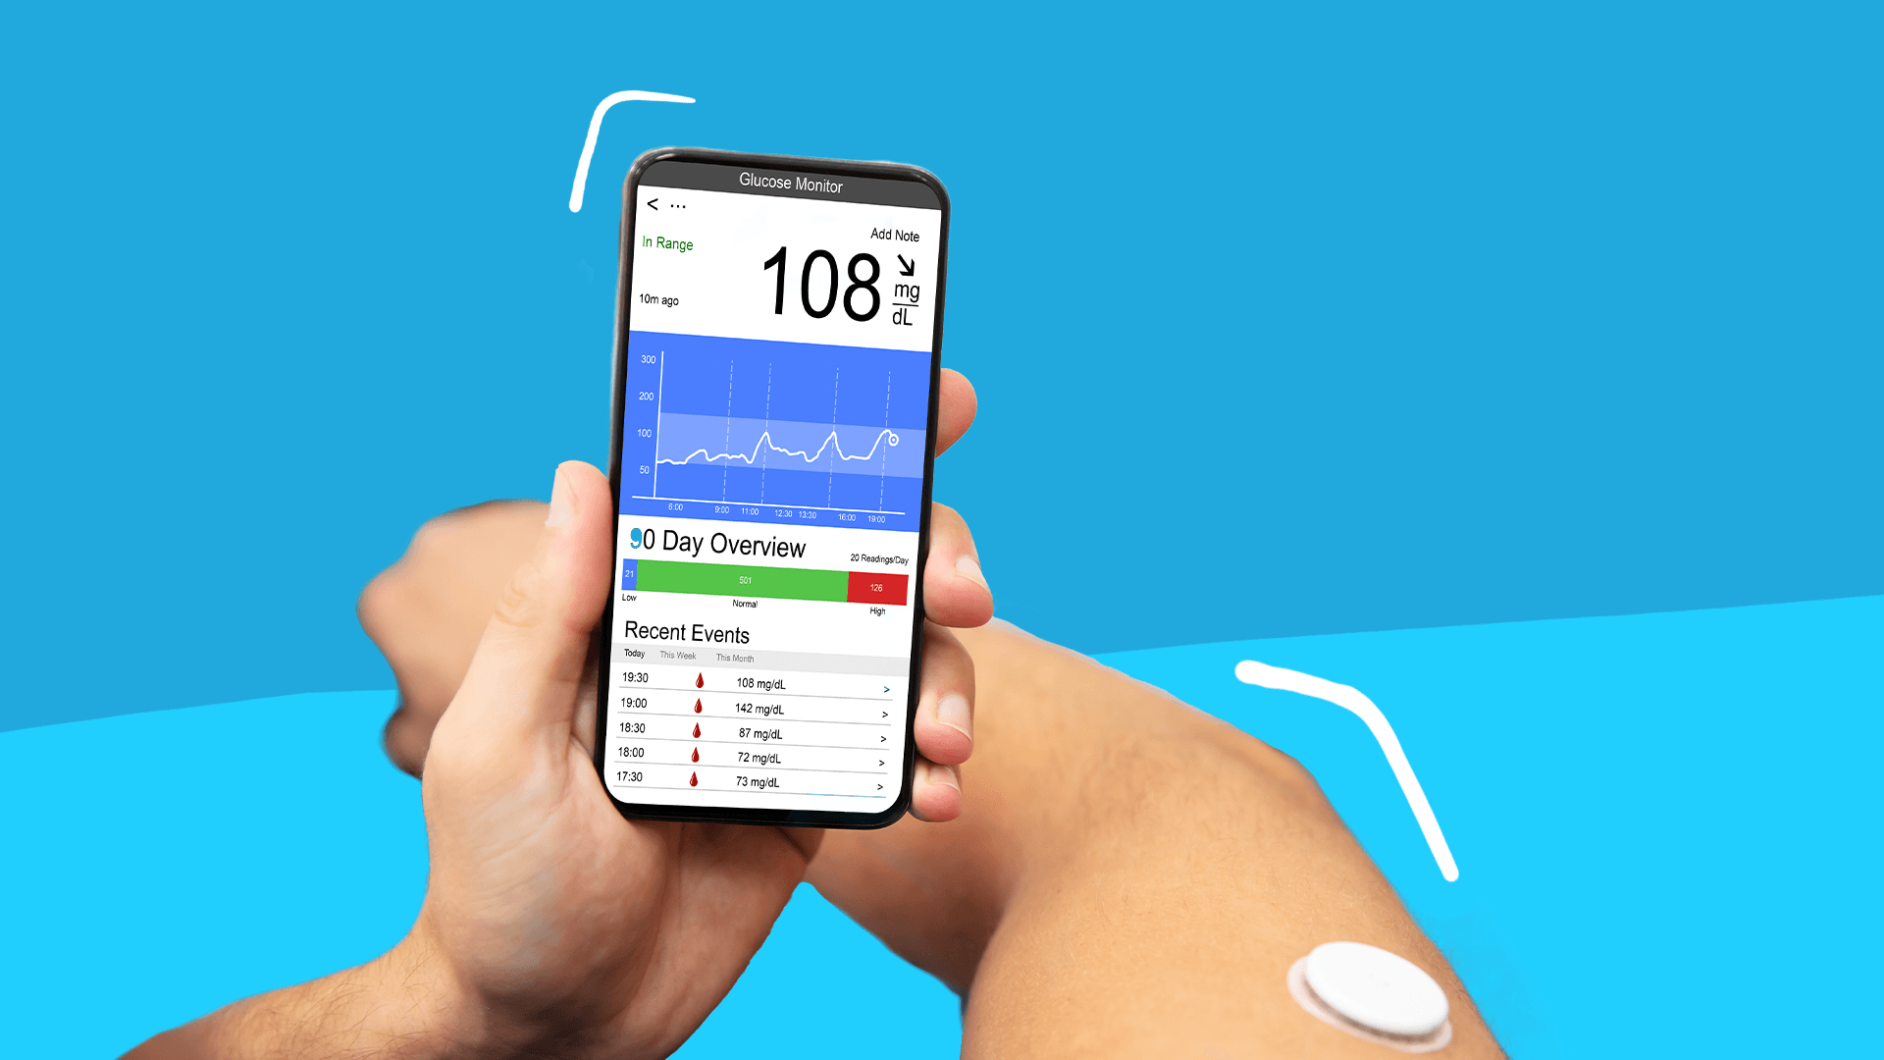 iHealth helps manage your blood pressure and weight on your iPhone